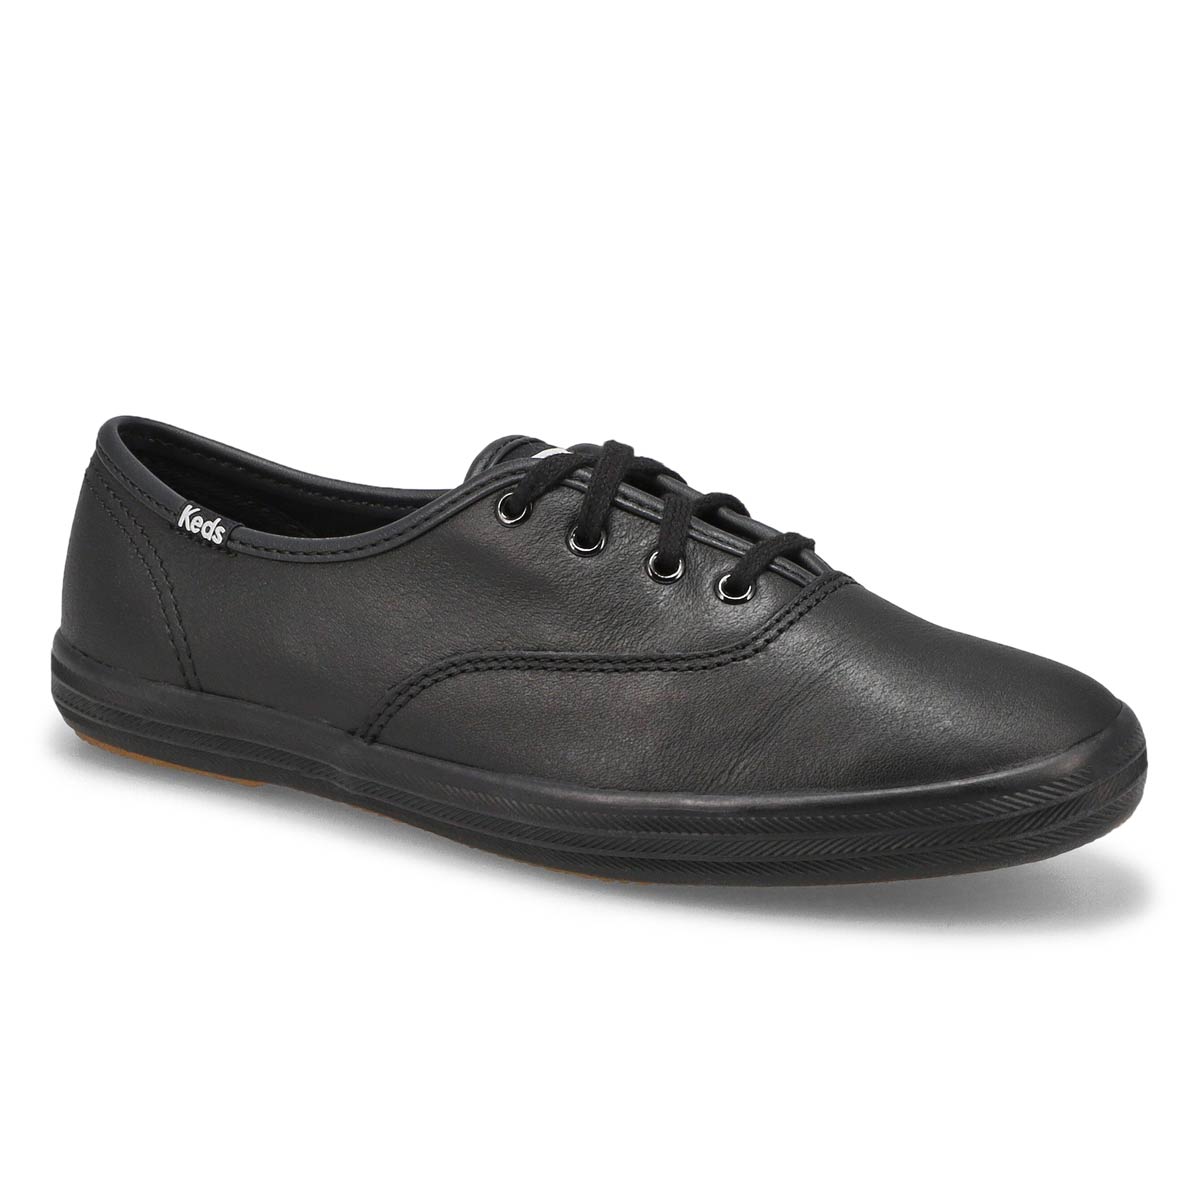 keds black leather sneakers